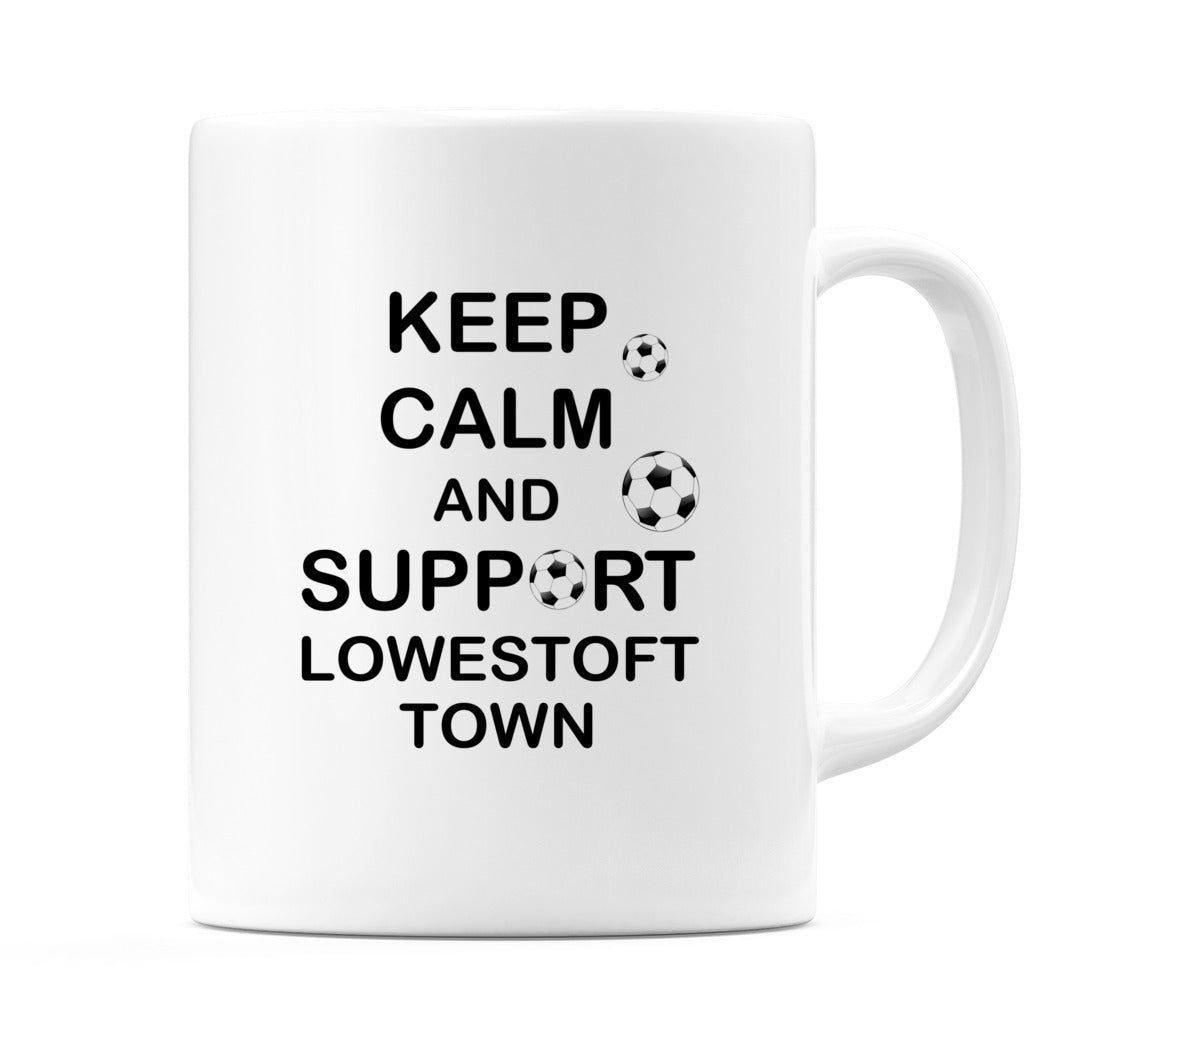 Keep Calm And Support Lowestoft Town Mug